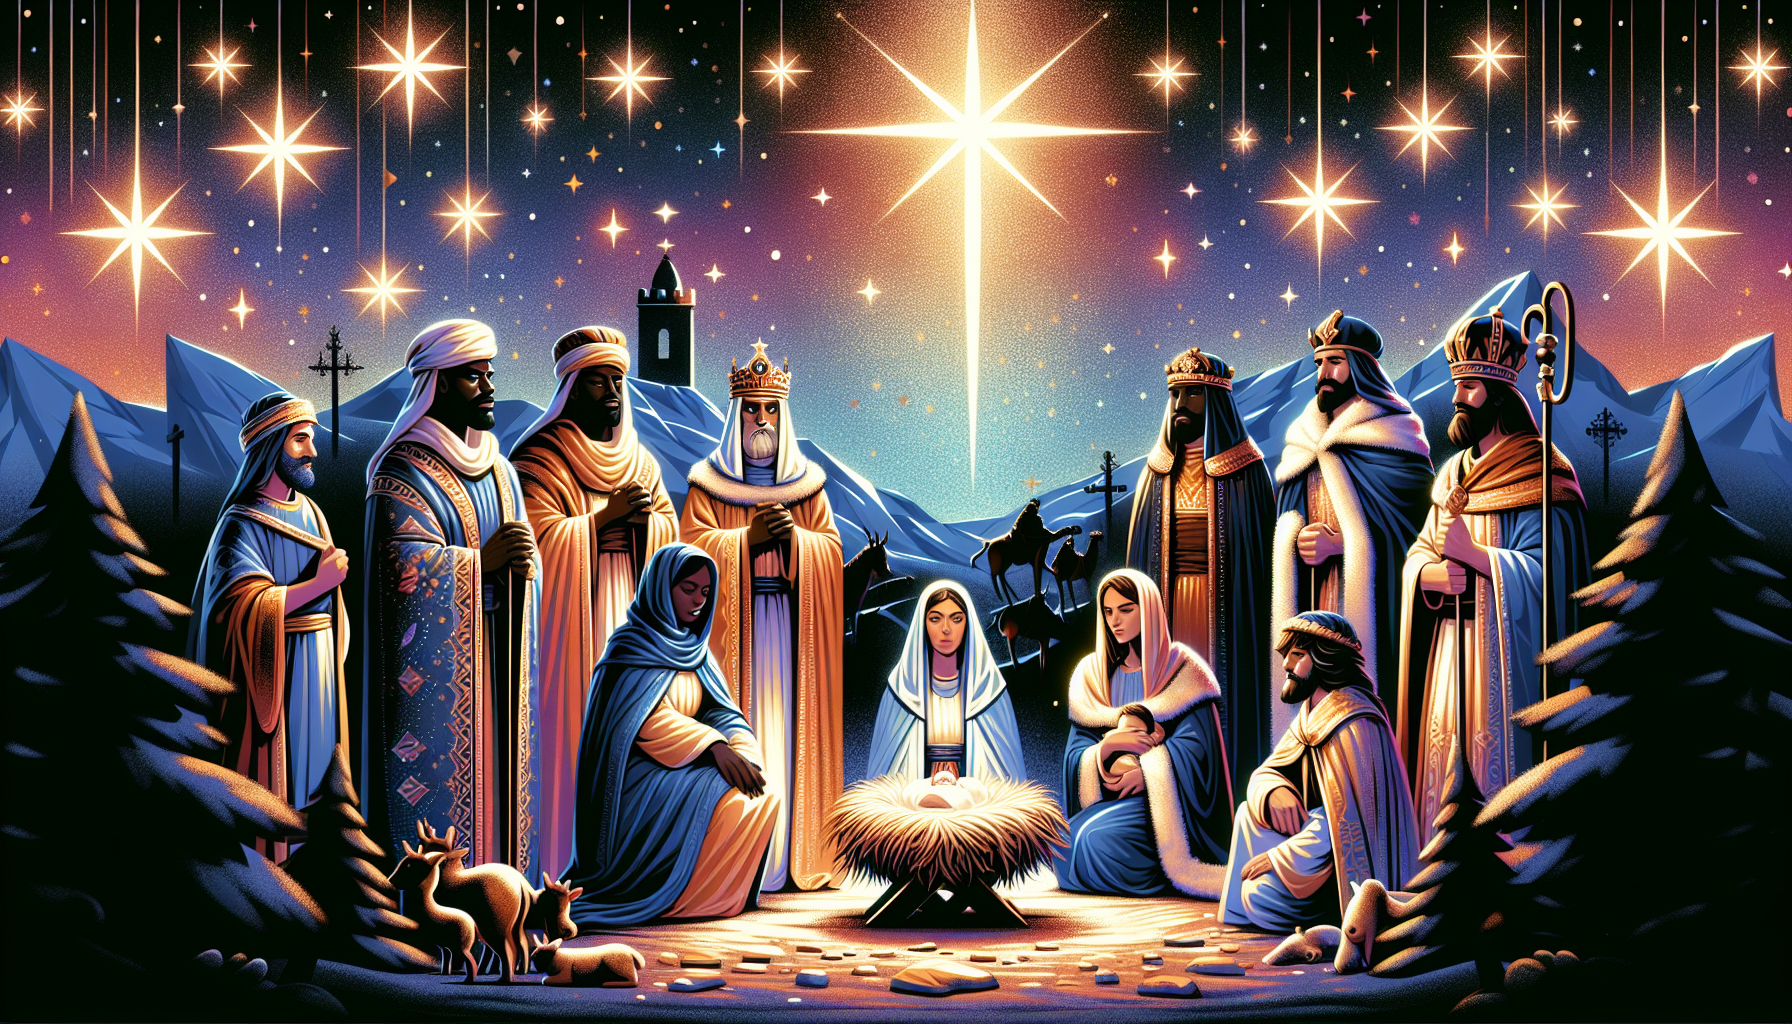 Artistic interpretation of the birth of Jesus in a traditional Nativity scene set in Bethlehem, with diverse cultural elements to represent His universal significance, under a starry night sky illumin